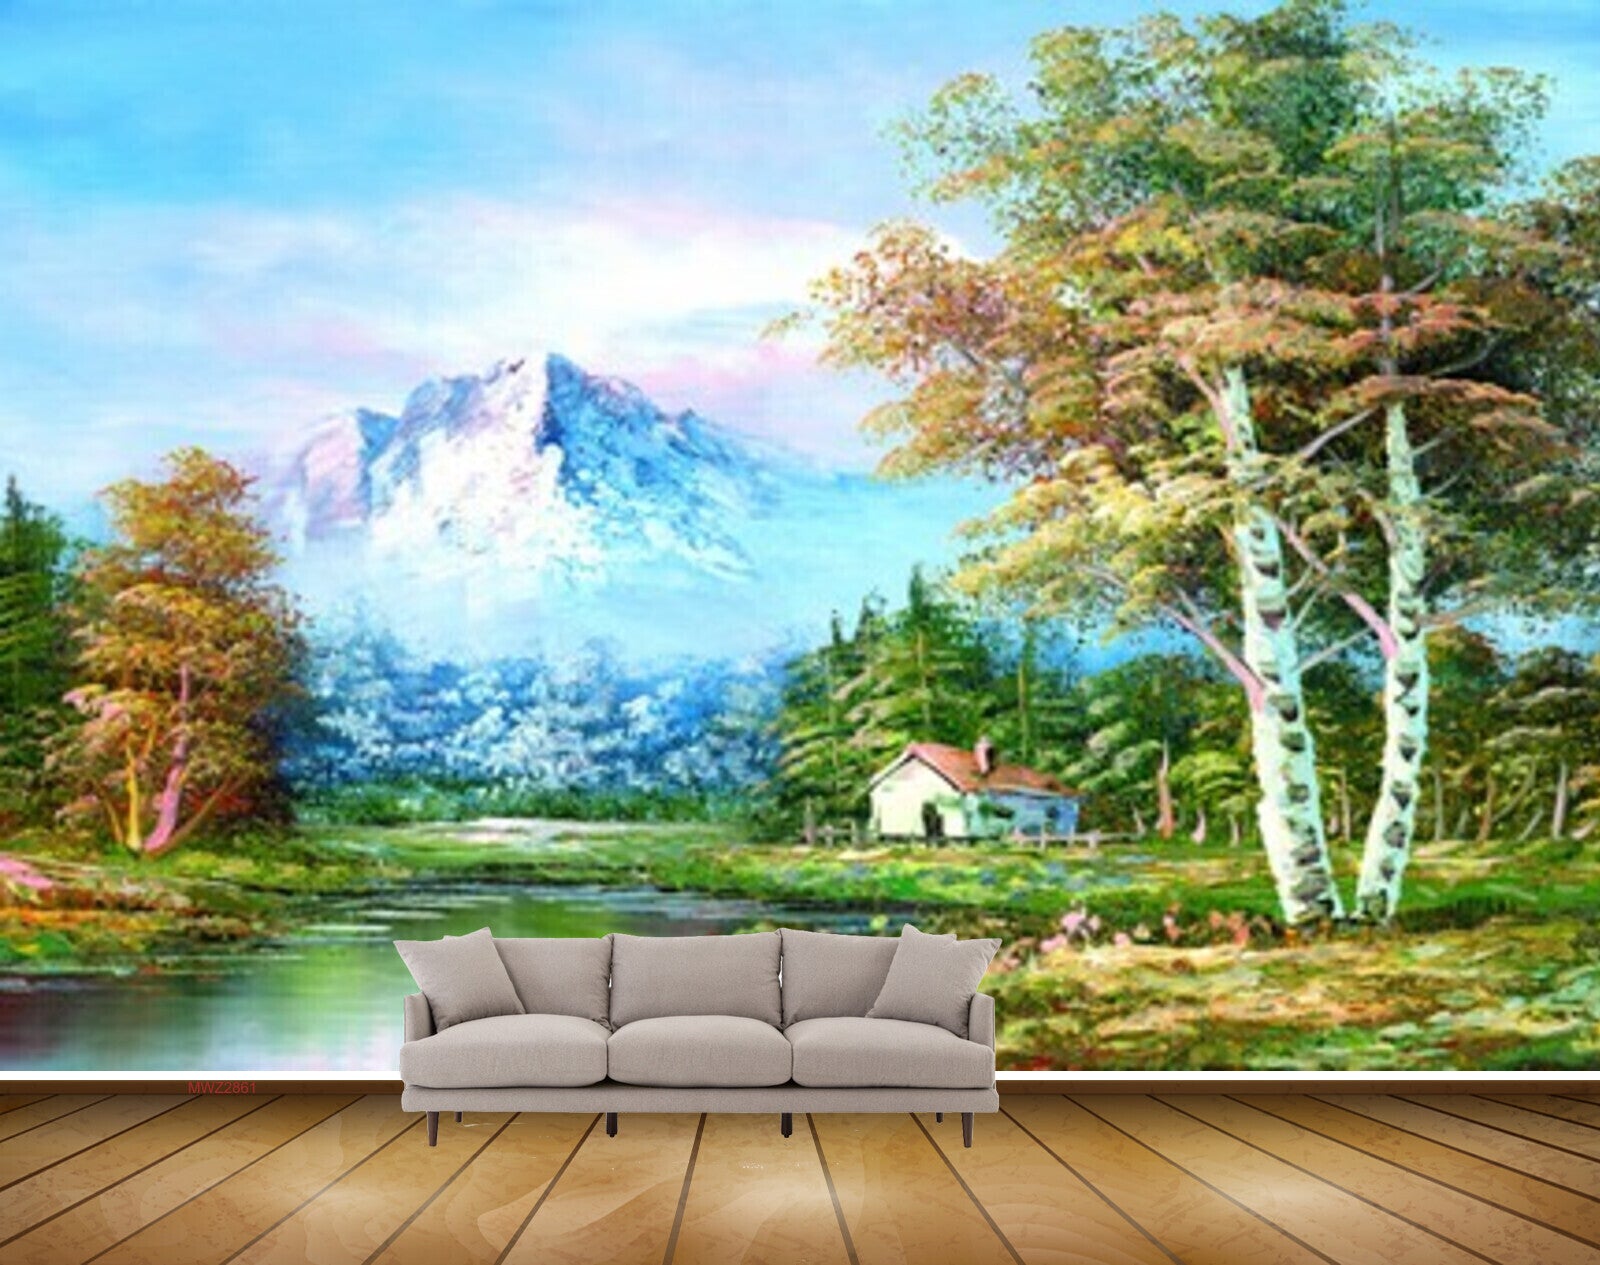 Avikalp MWZ2861 Sky Mountains Trees House Lake River Pond Water Flowers Clouds Hut House Grass Plants Painting HD Wallpaper